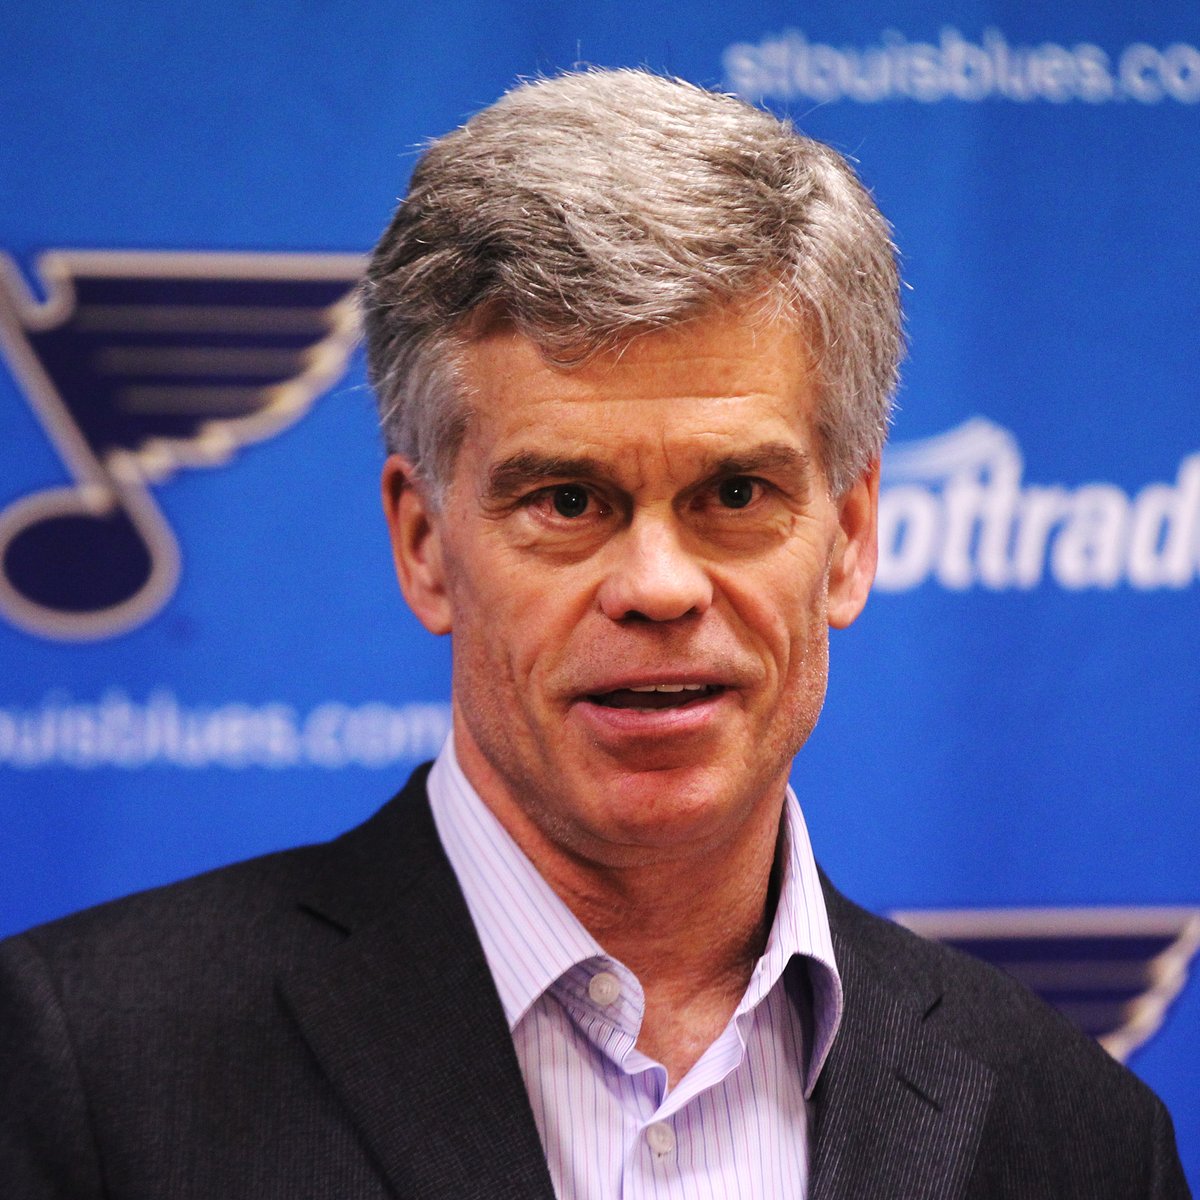 Stillman group takes complete ownership of St. Louis Blues - St